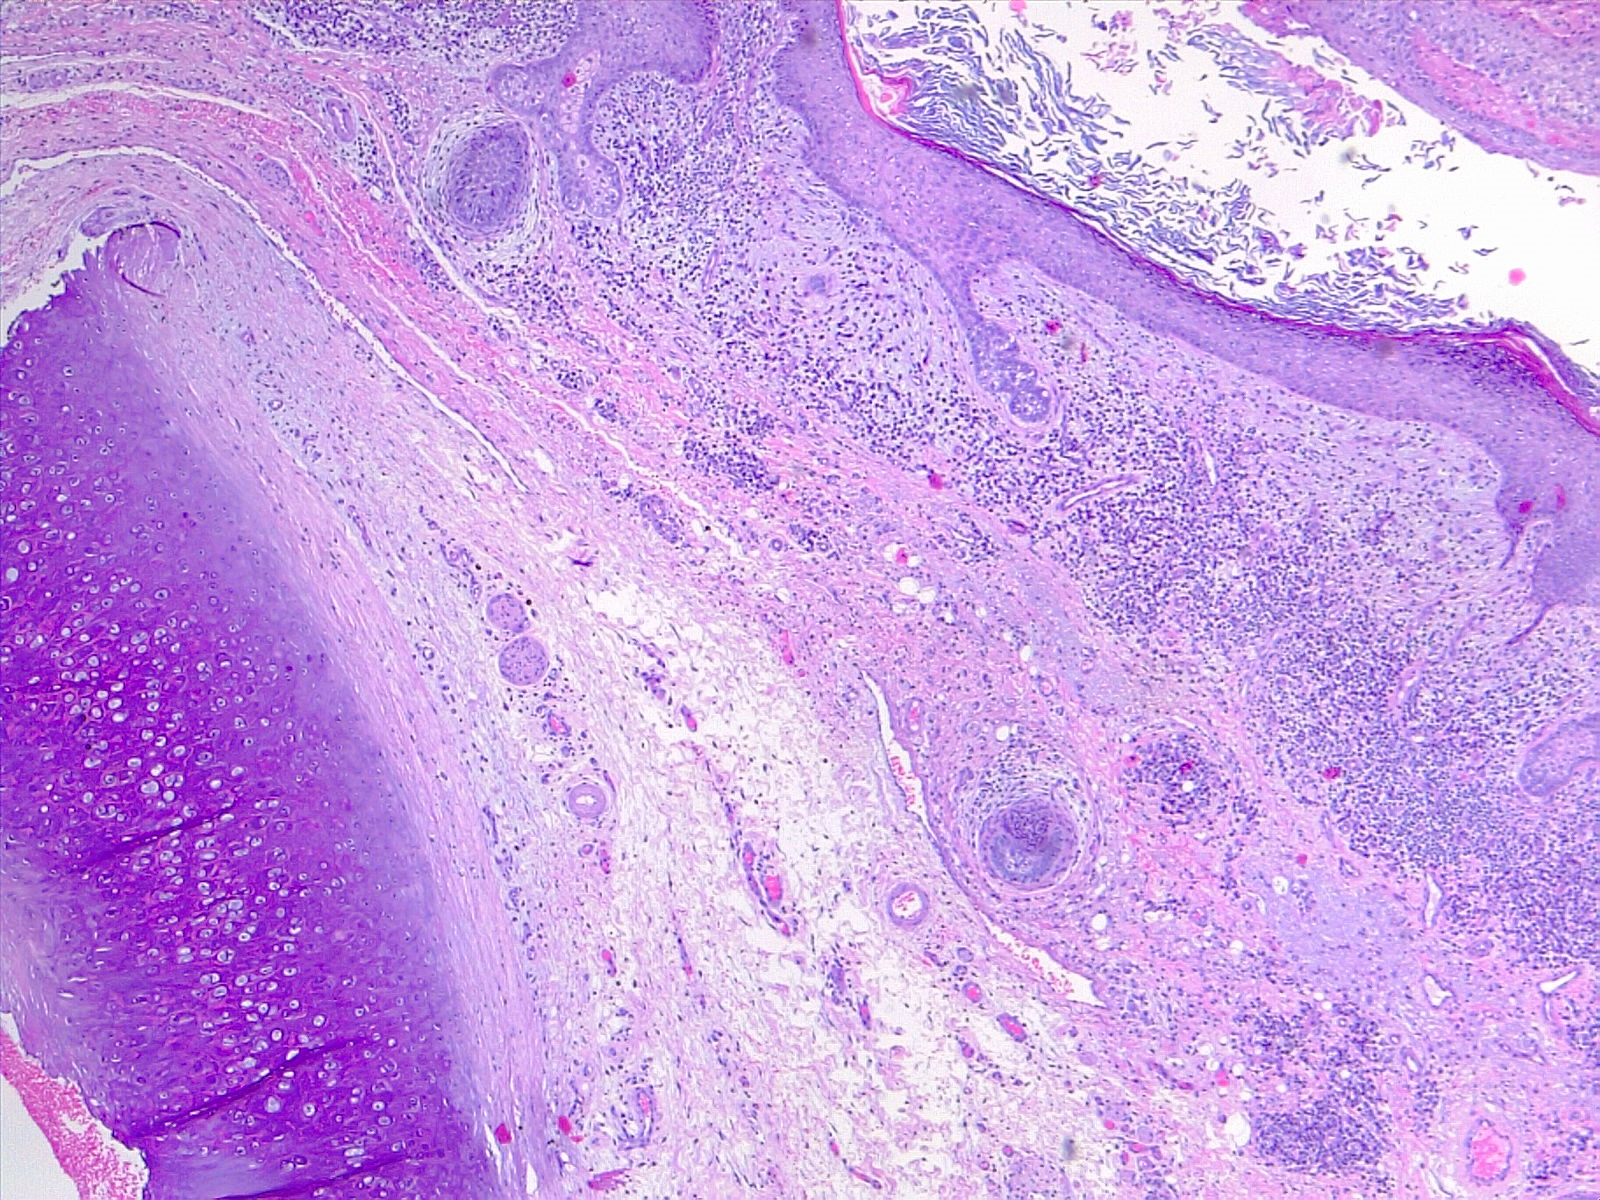 <p>Earlobe, Cartilage, Soft Tissue, and Cutis of the External Ear. H/E 4x magnification.</p>